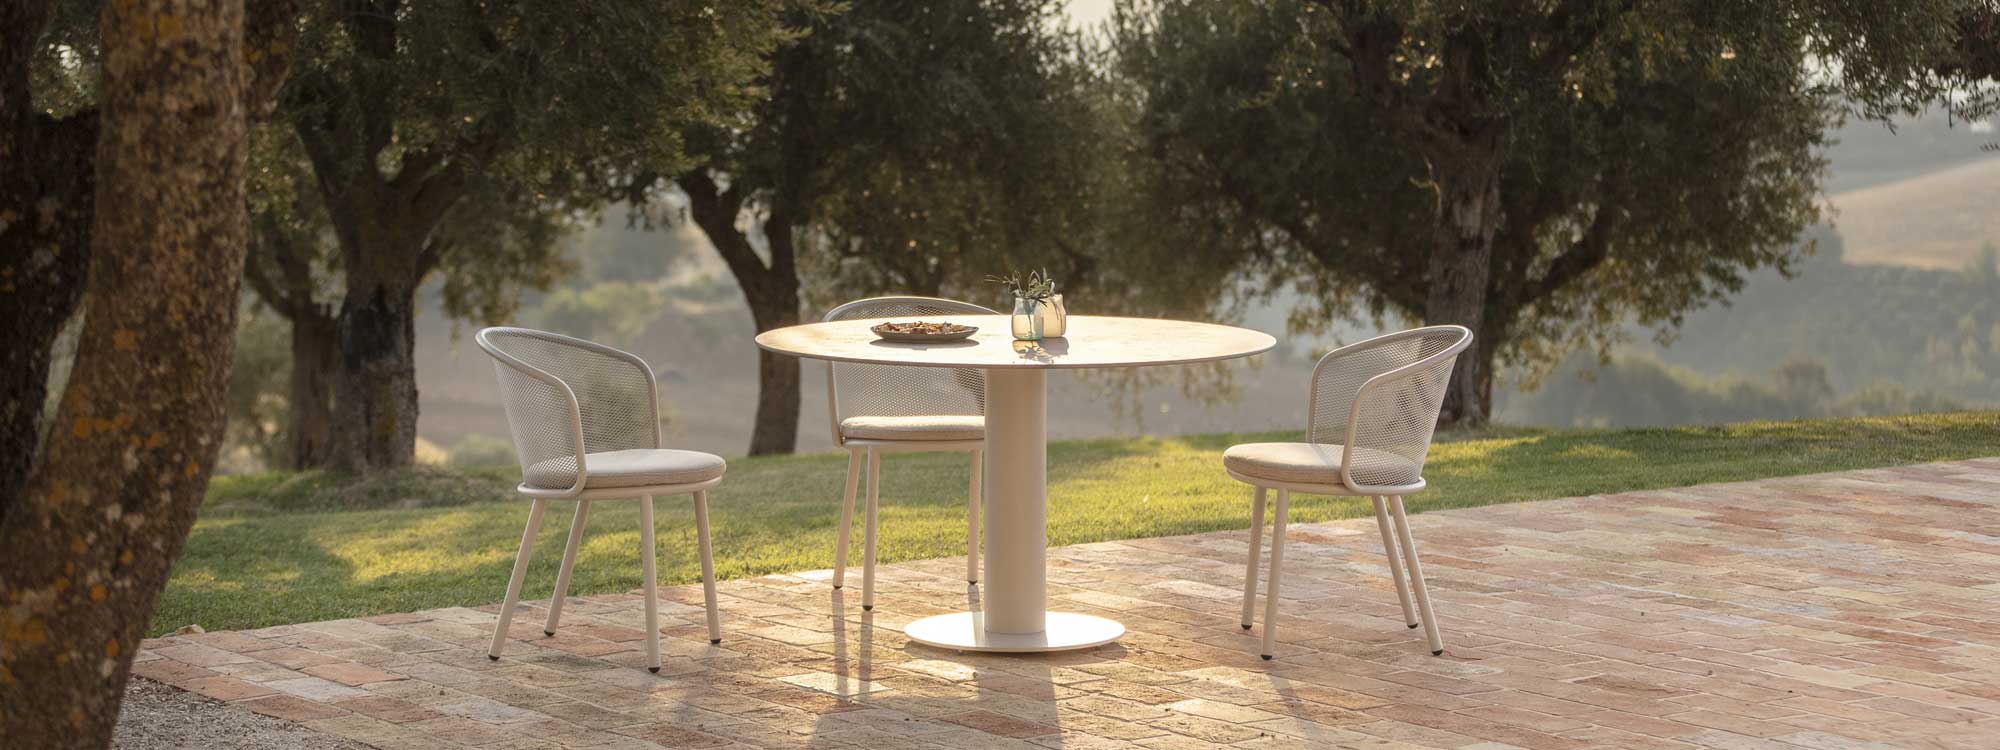 Dusk shot of Baza garden dining chair and Branta pedestal table on terrace with olive trees in background